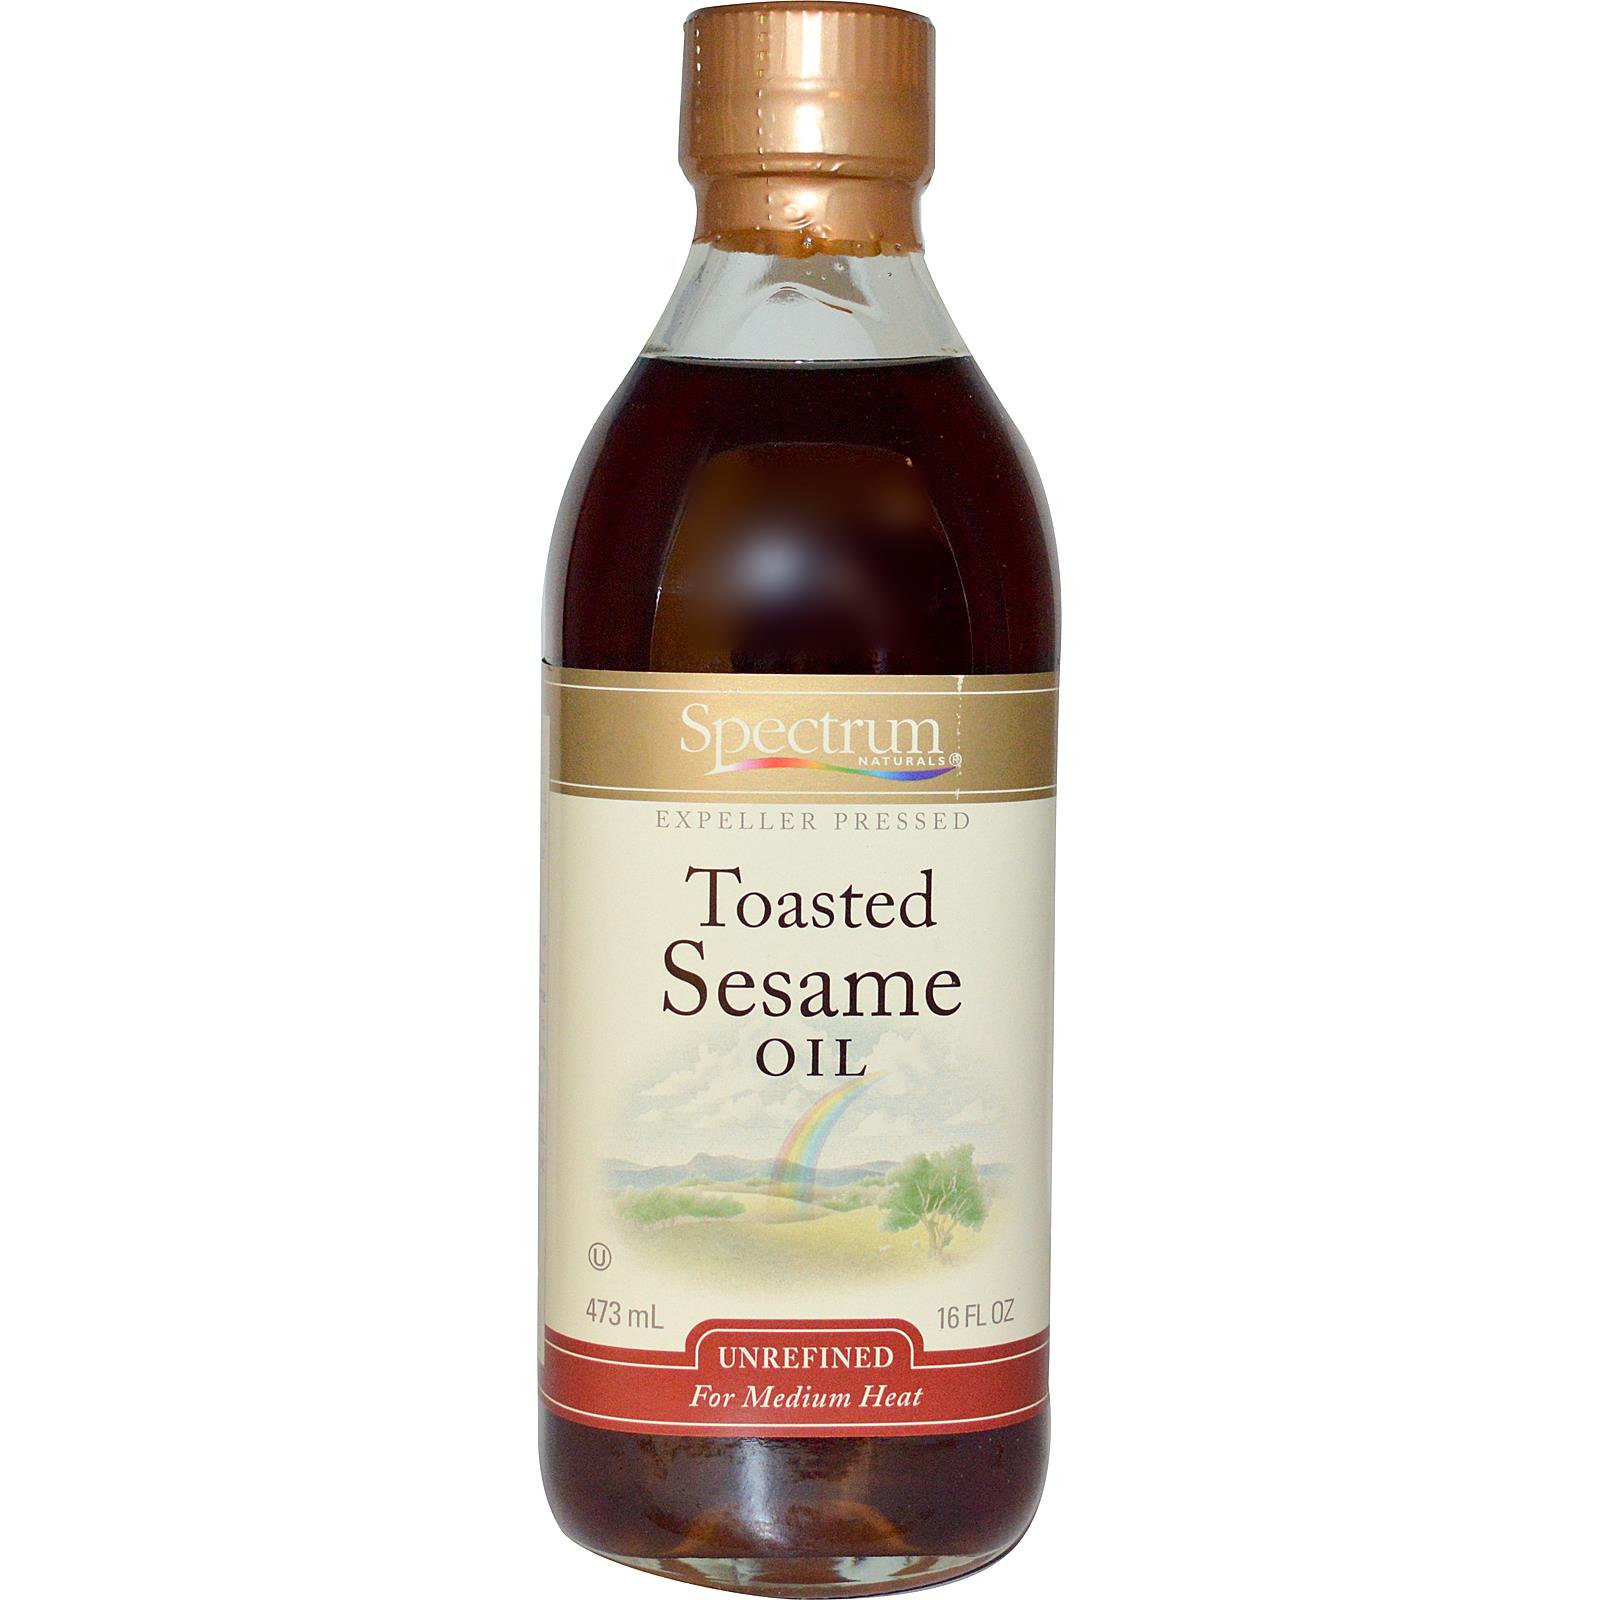 Sesame Oil Nutrition Facts And Health Benefits Hb Times,Growing Asparagus